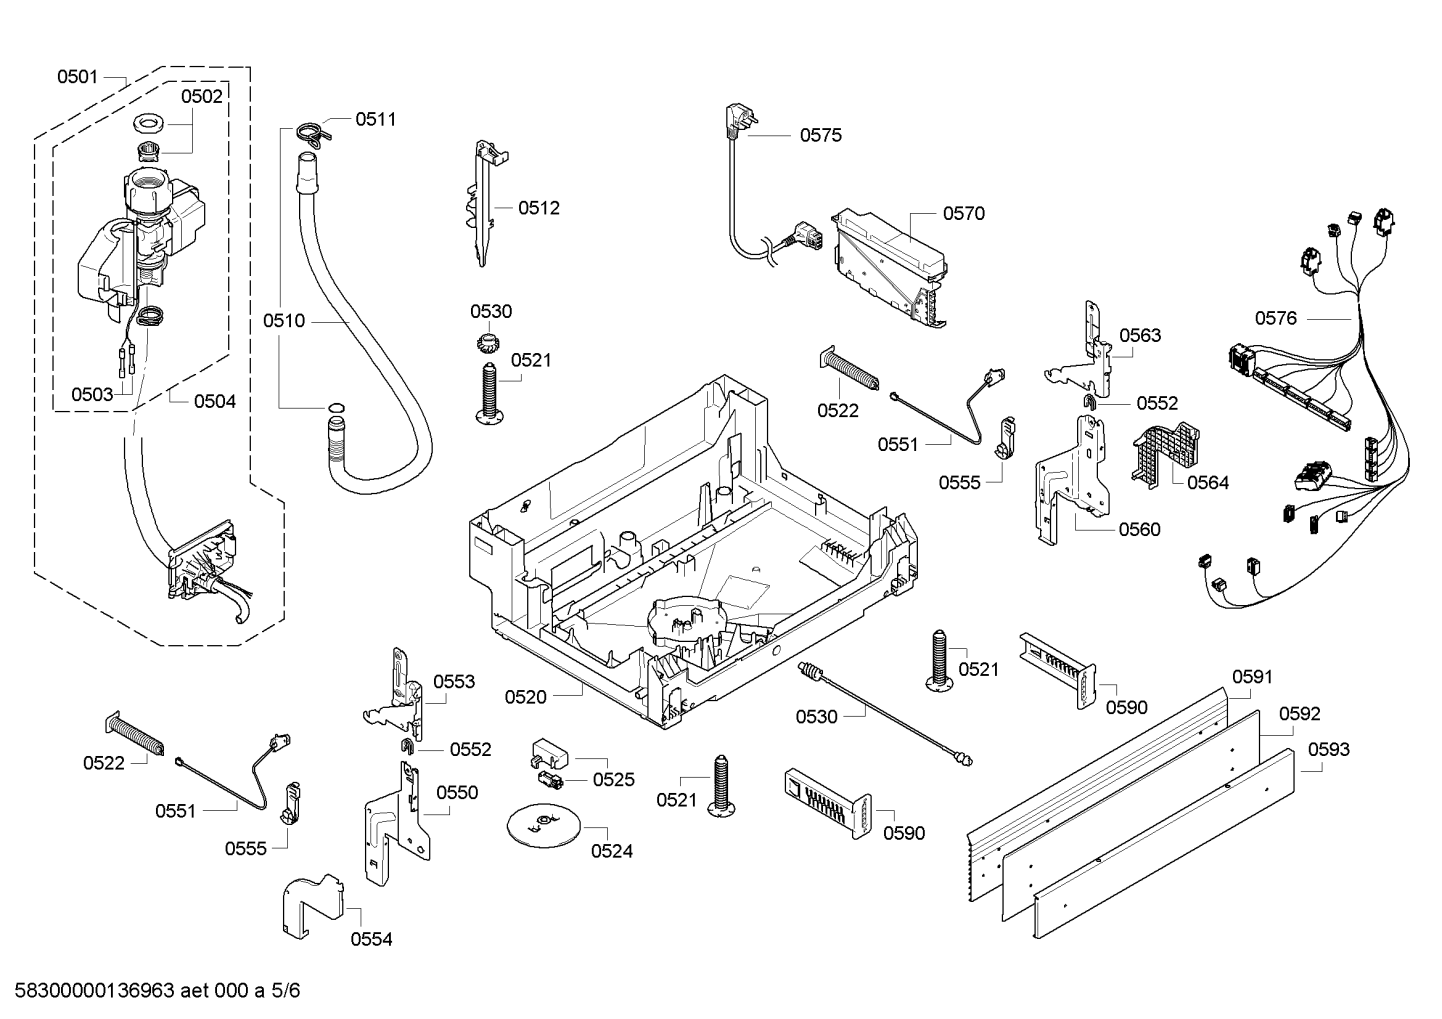 drawing_link_5_device_1561610